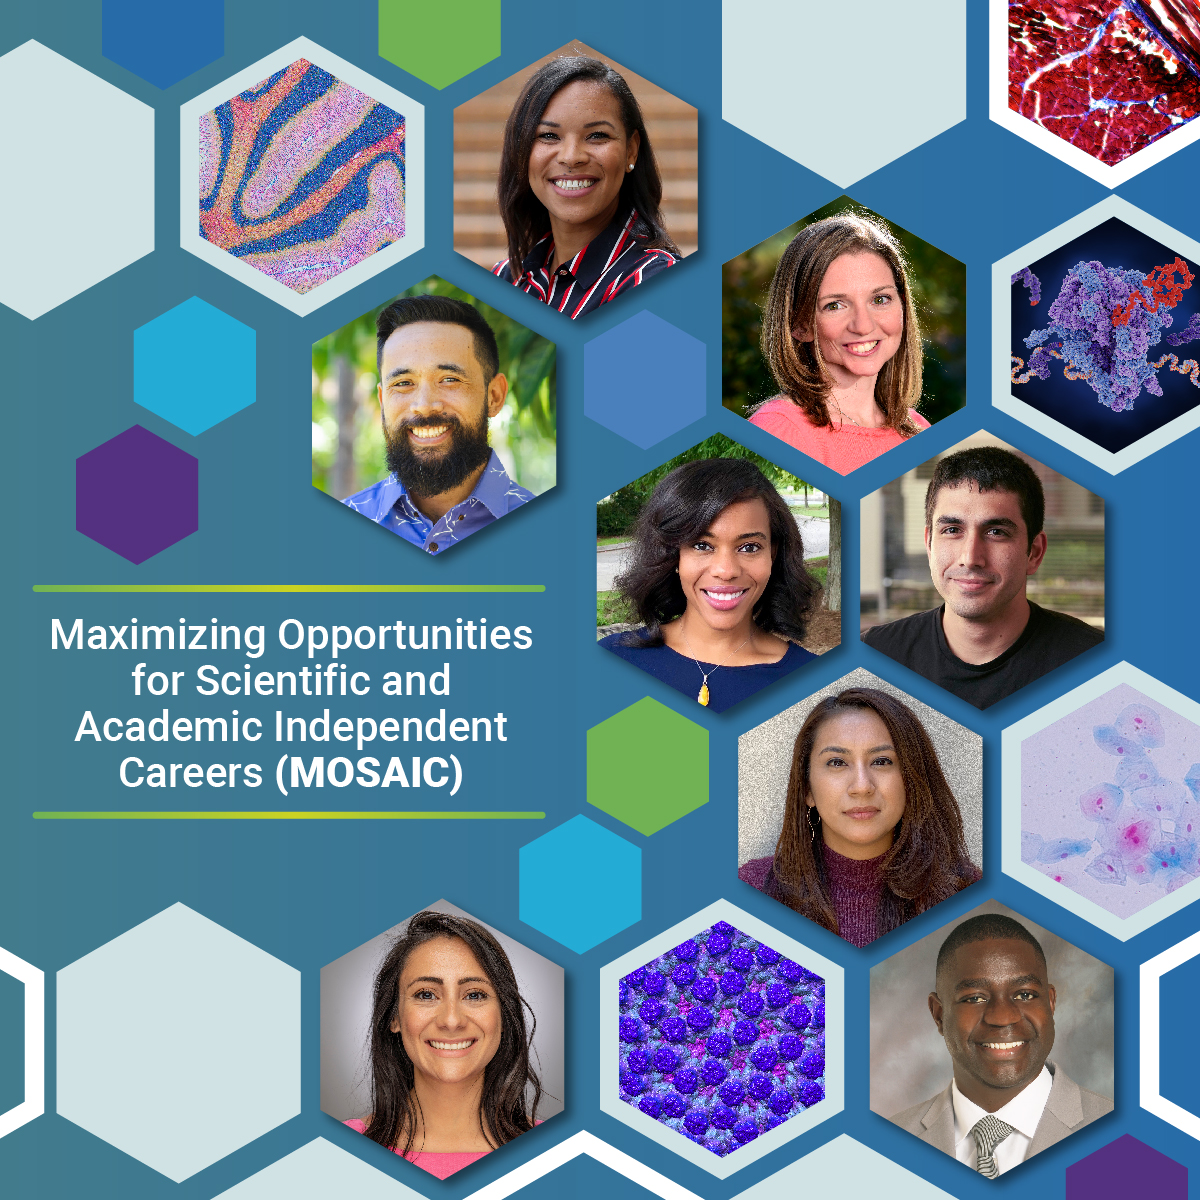 Collage of scientific images and a diverse group of MOSAIC scholars.